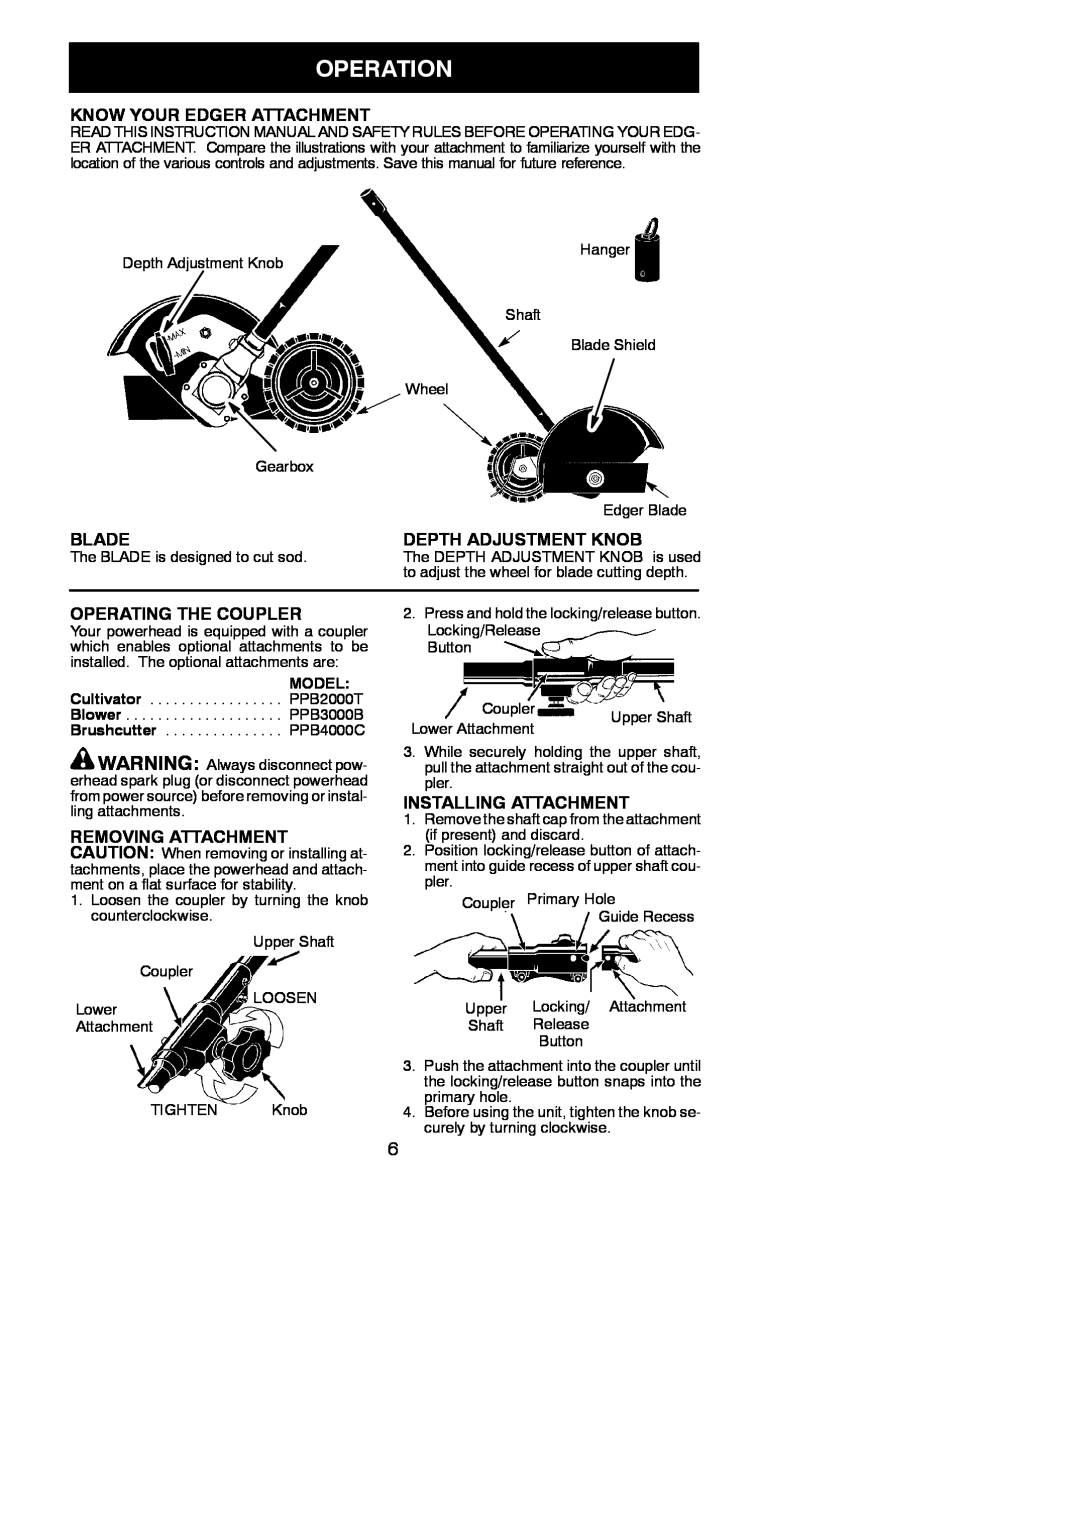 Poulan PPB1000E Operation, Know Your Edger Attachment, Blade, Depth Adjustment Knob, Operating The Coupler, Model 